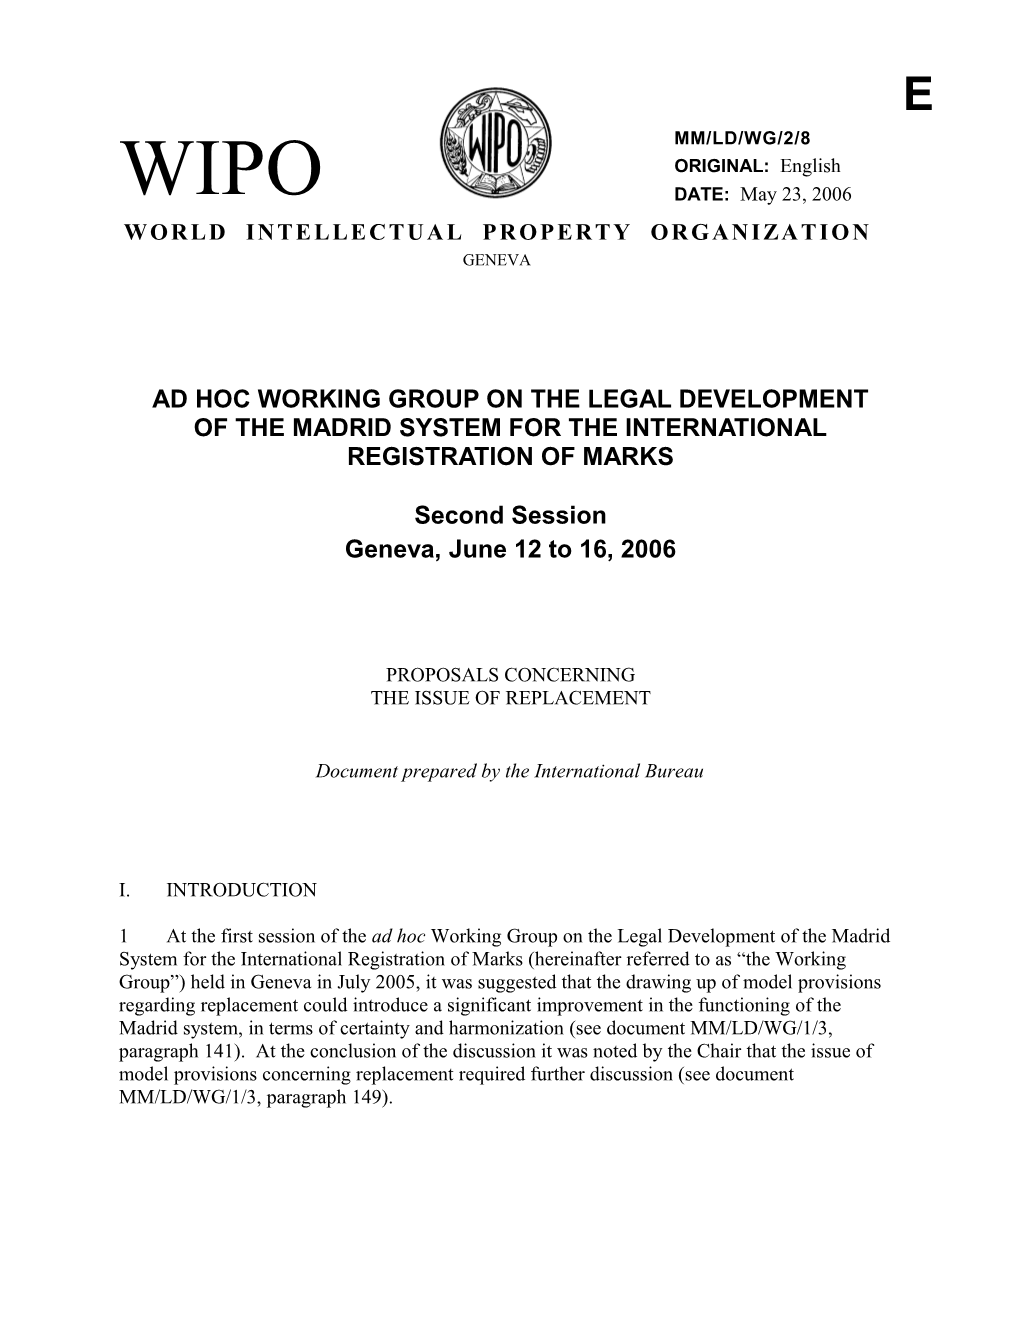 MM/LD/WG/2/8: Proposals Concerning the Issue of Replacement